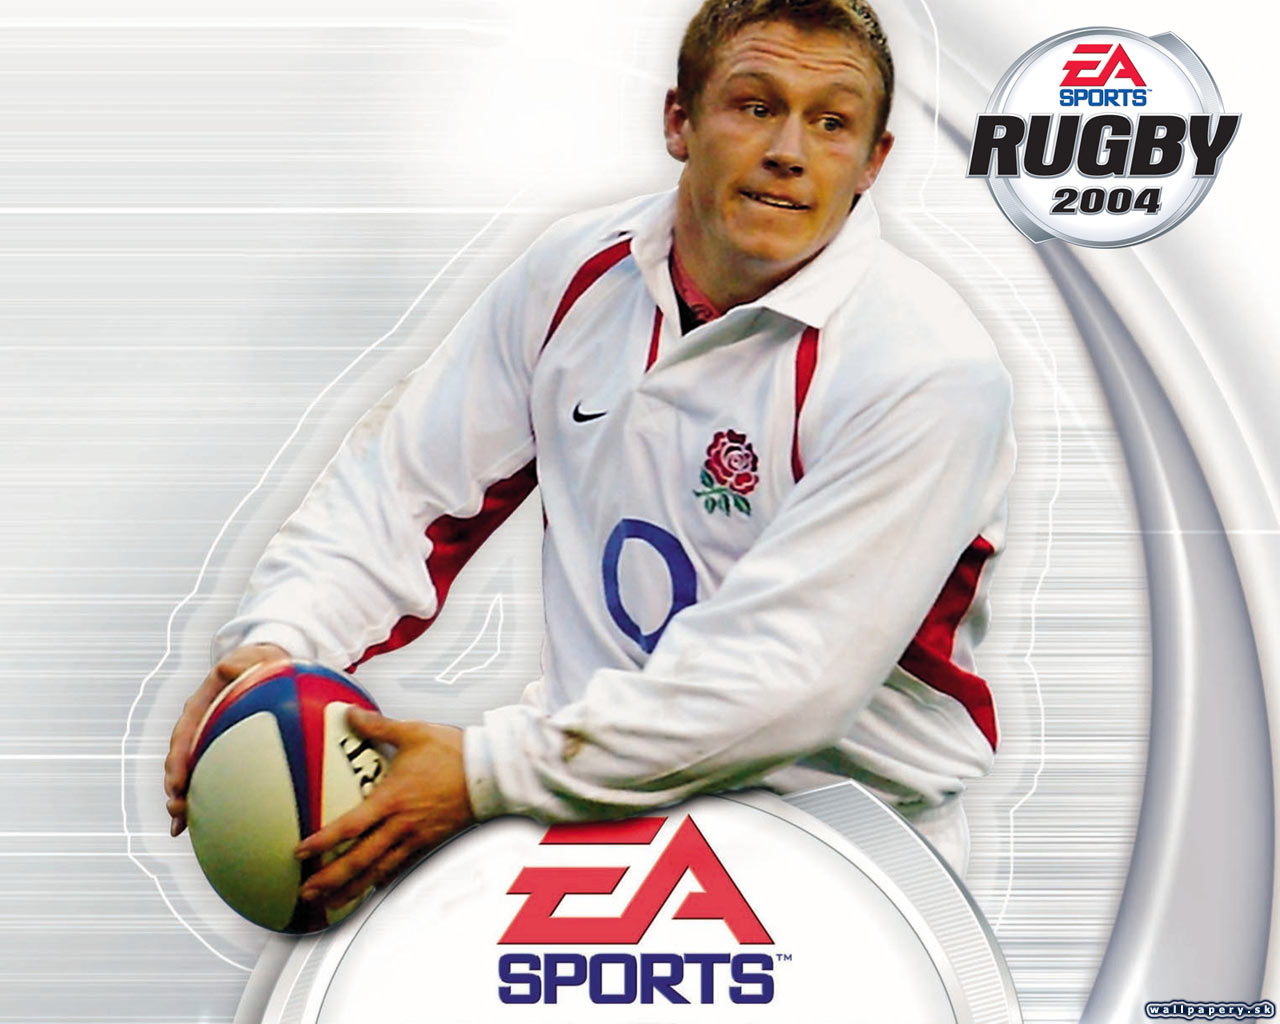 Rugby 2004 - wallpaper 4